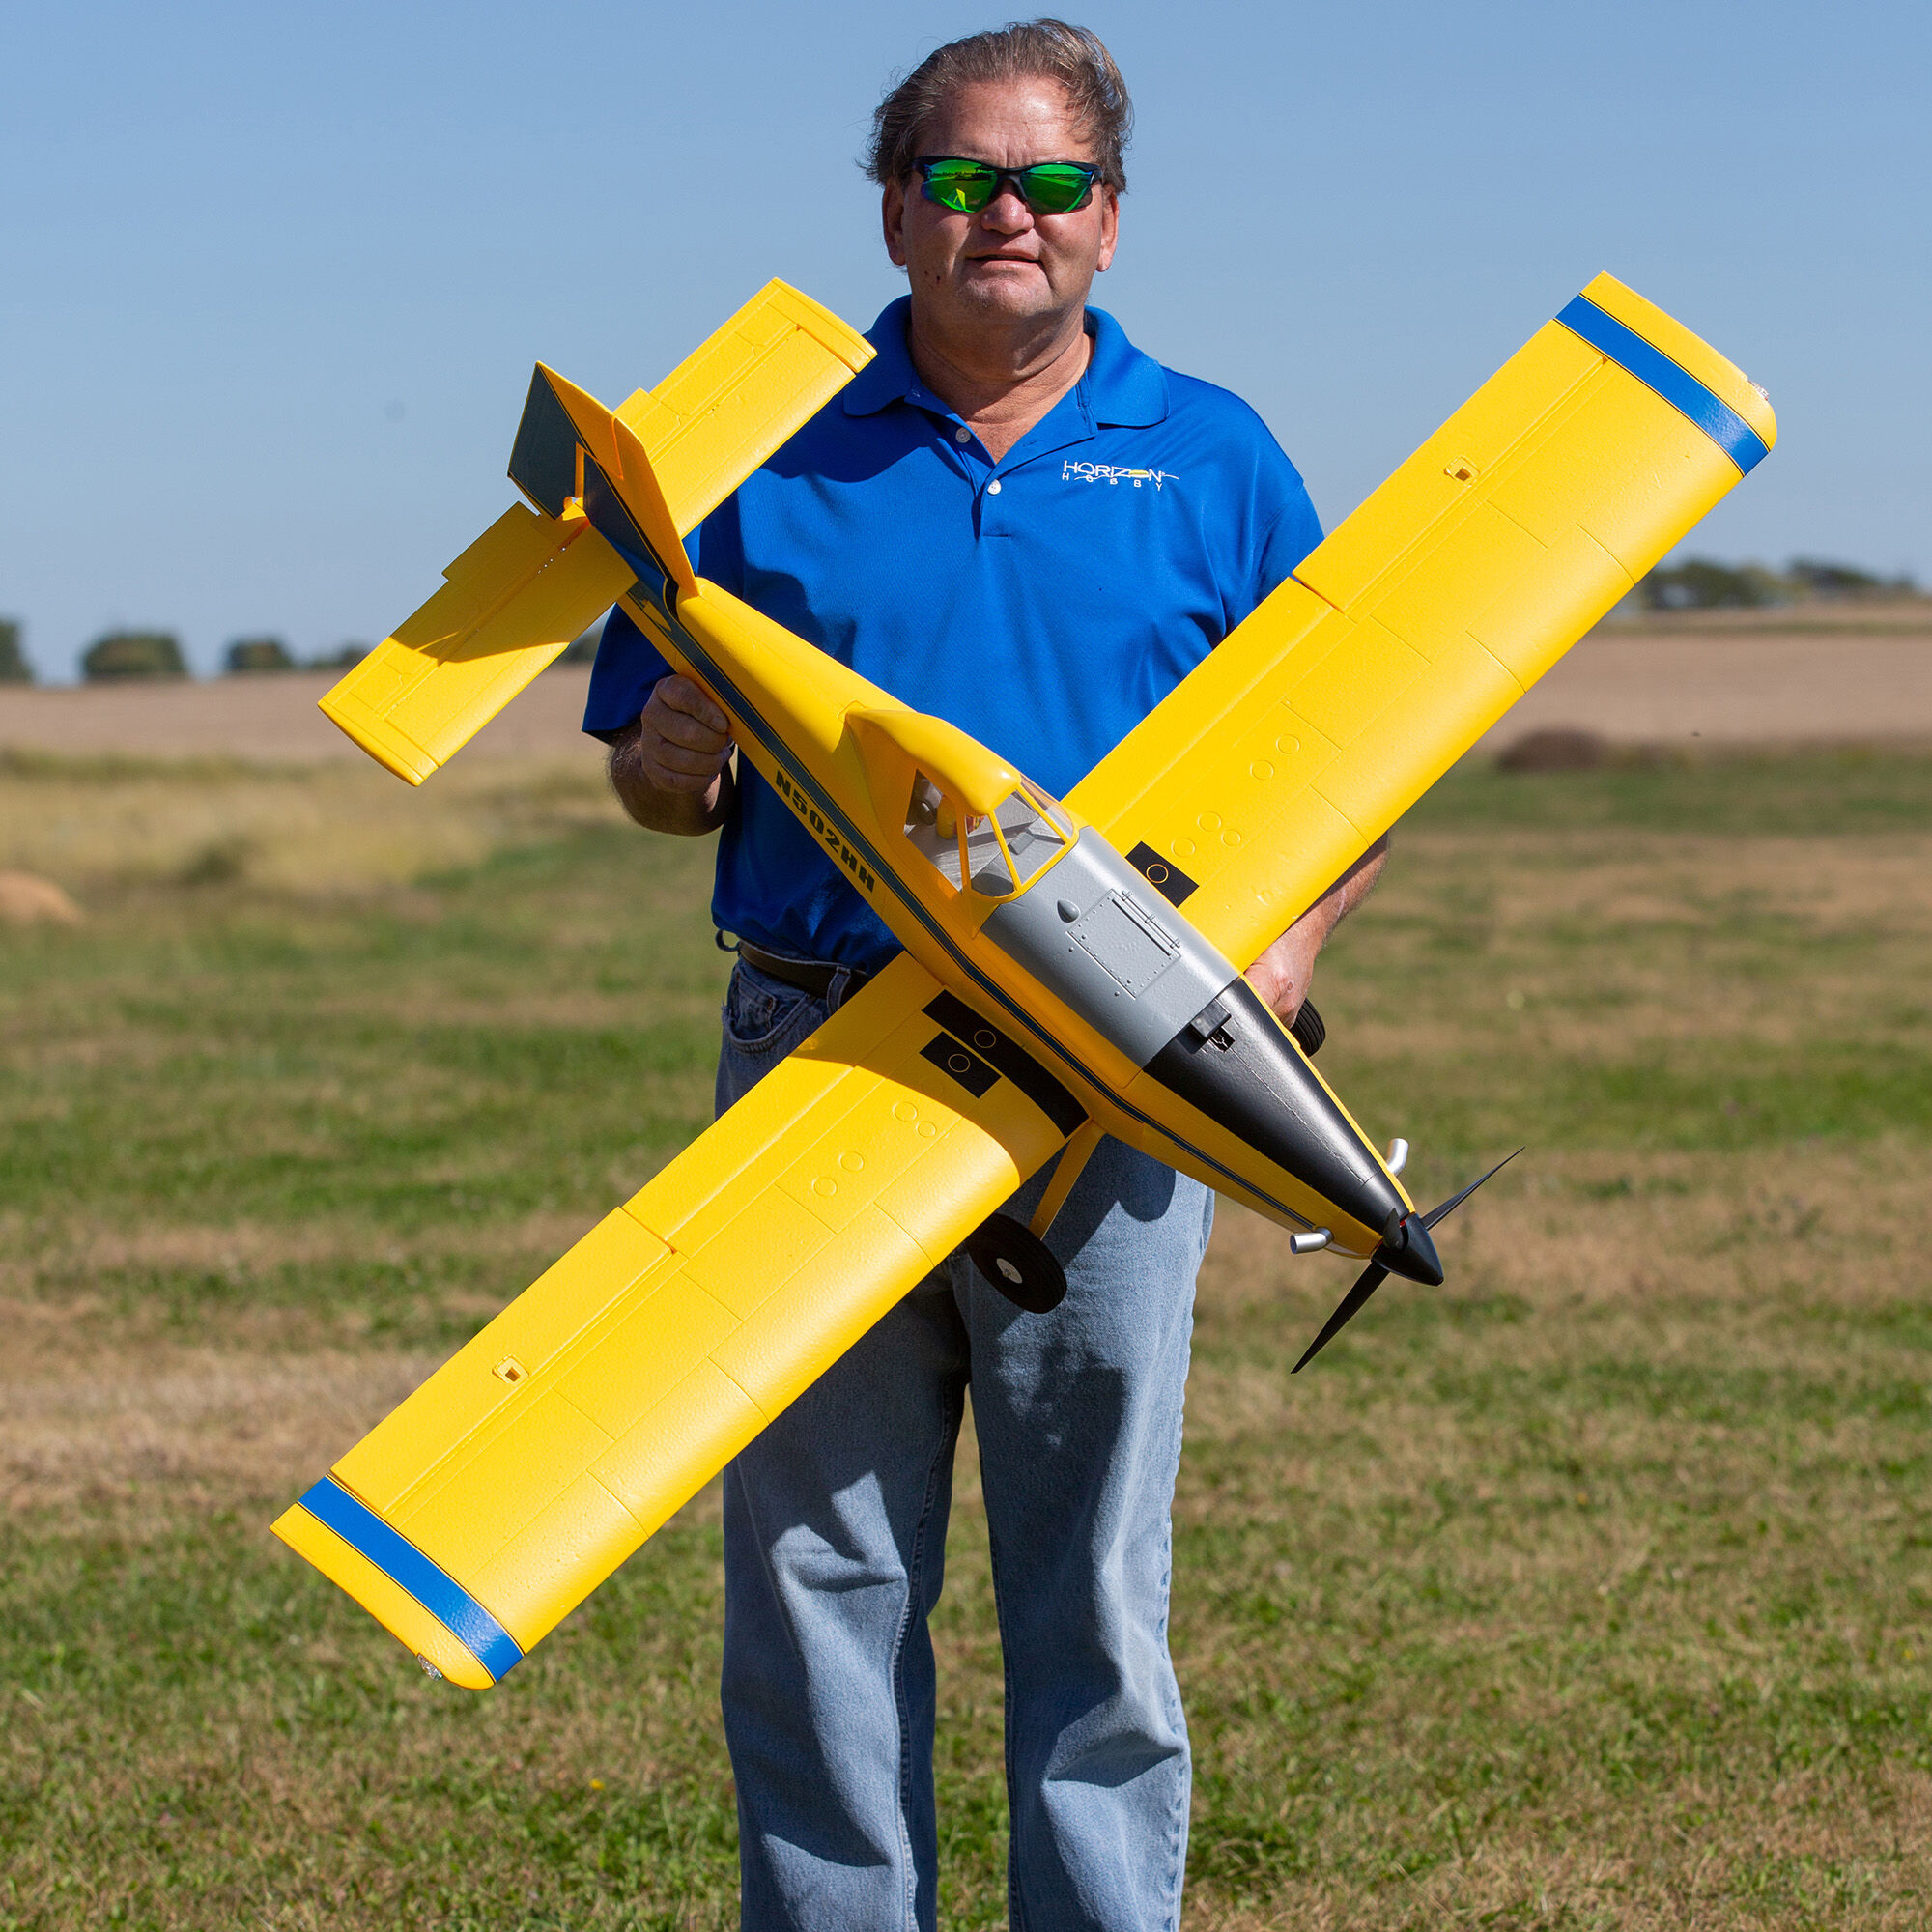 rc crop duster